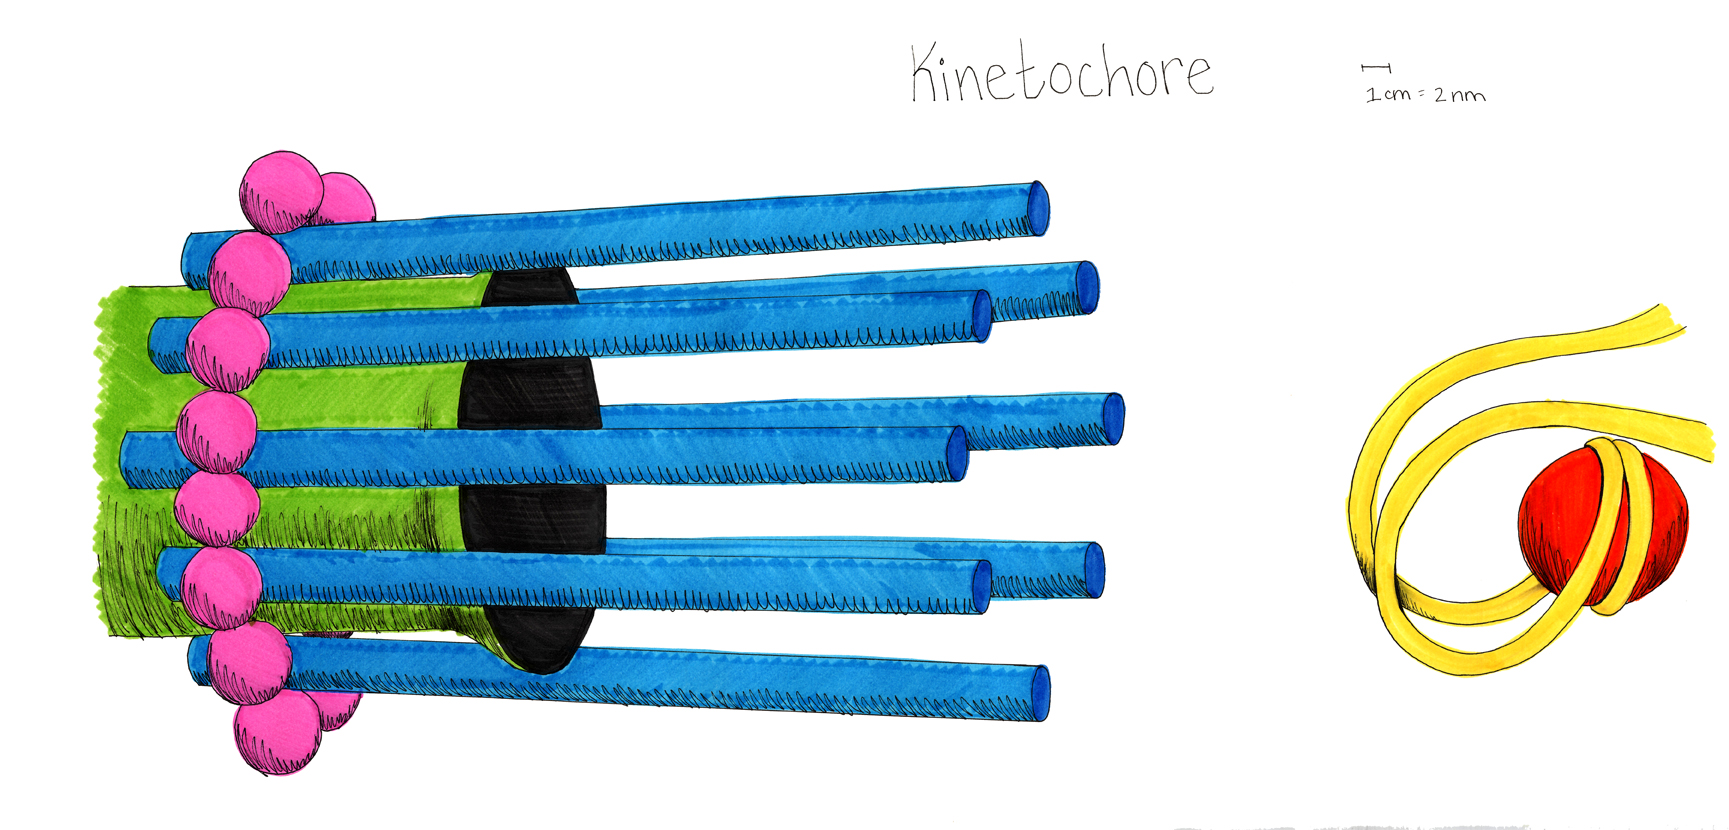 This drawing shows the structure of the kinetochore. A microtubule (green) with a flared end is surrounded by 8 thin rods/proteins (blue), which are then enclosed by 16 proteins (pink). This structure then connects (in a way that is not shown) to the DNA strand (yellow) while it is in a hook-like structure holding the cse4 nucleosome.